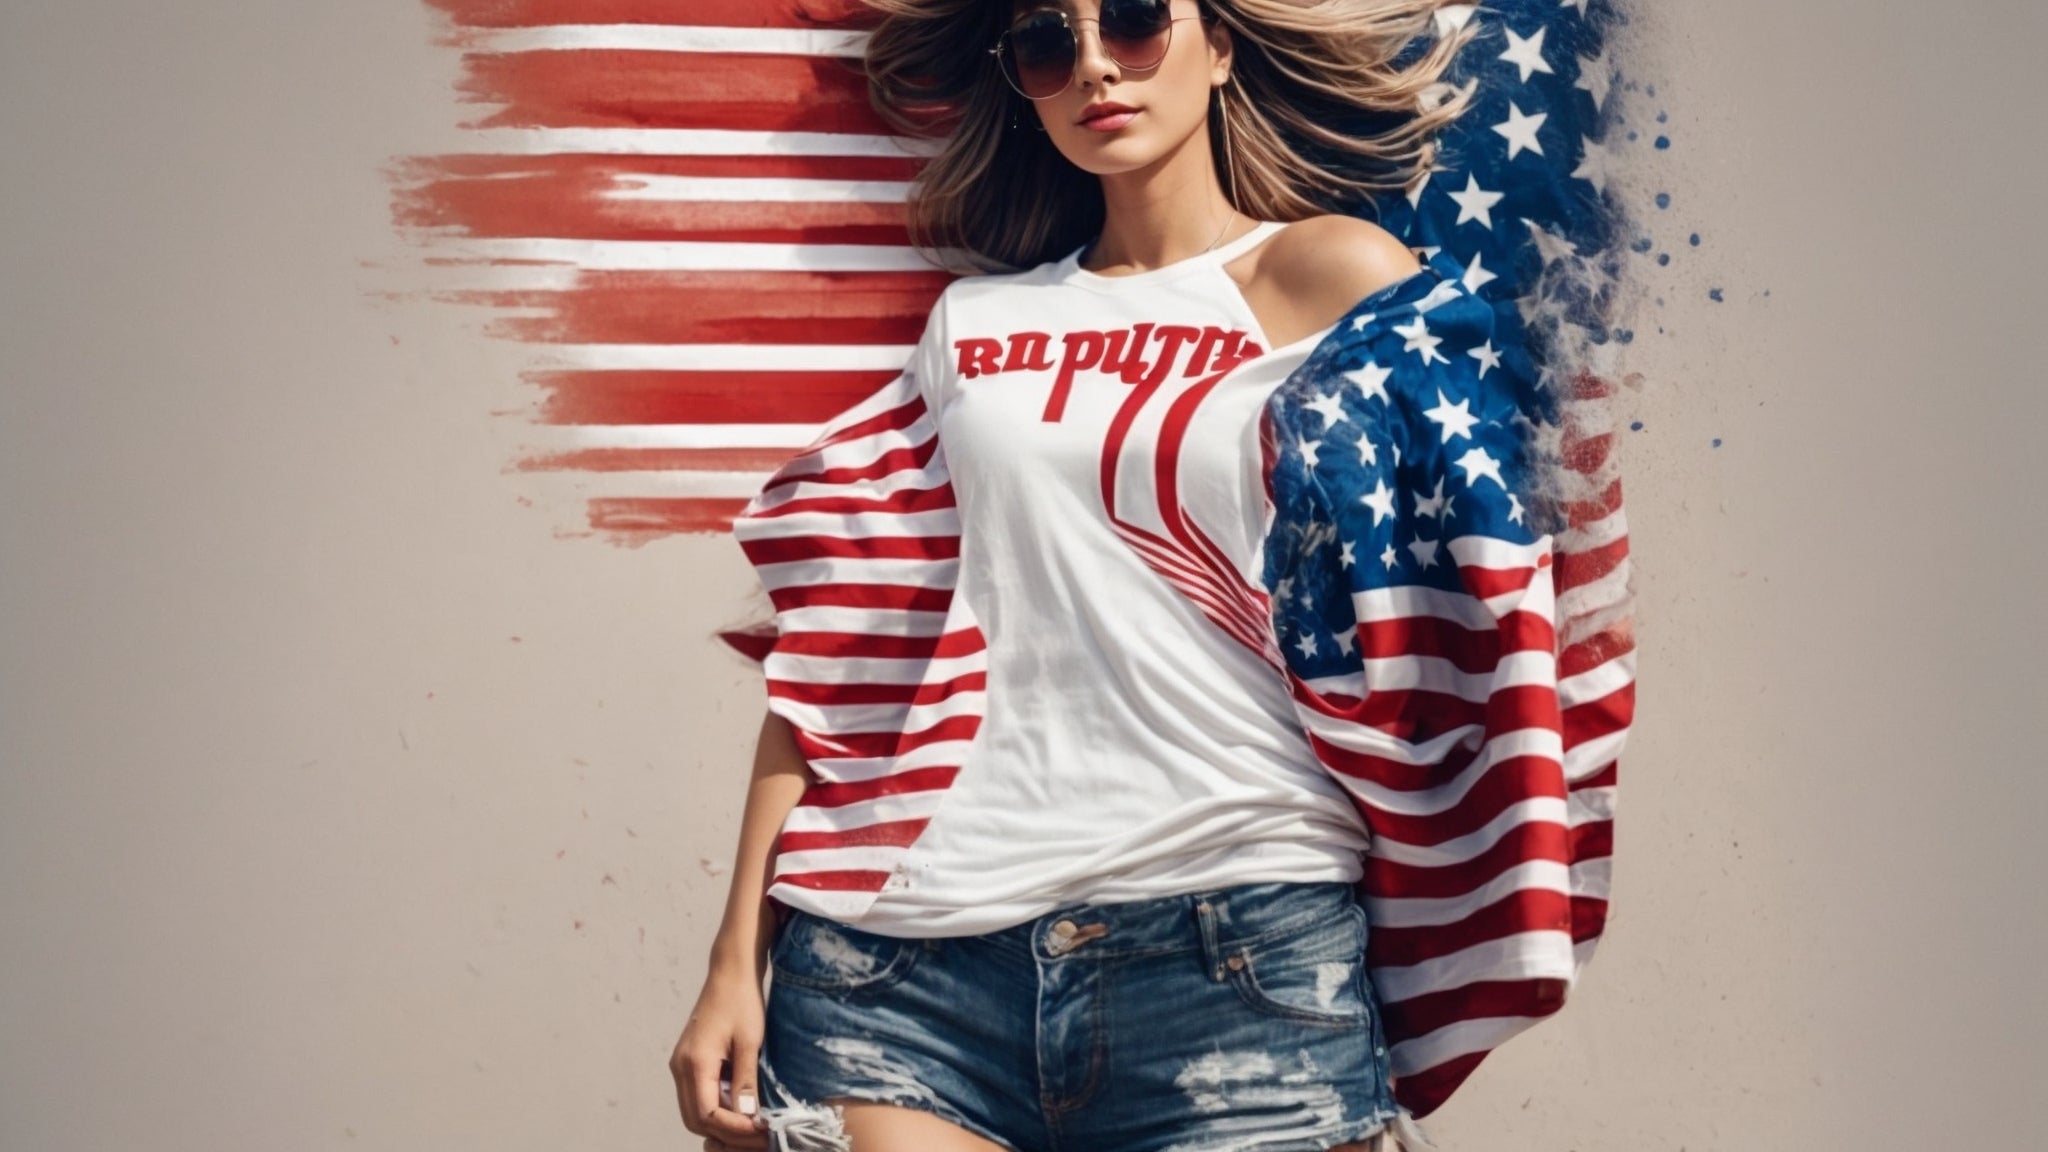 Express Your Republican Patriotism with Stylish Tees for Trump Supporters